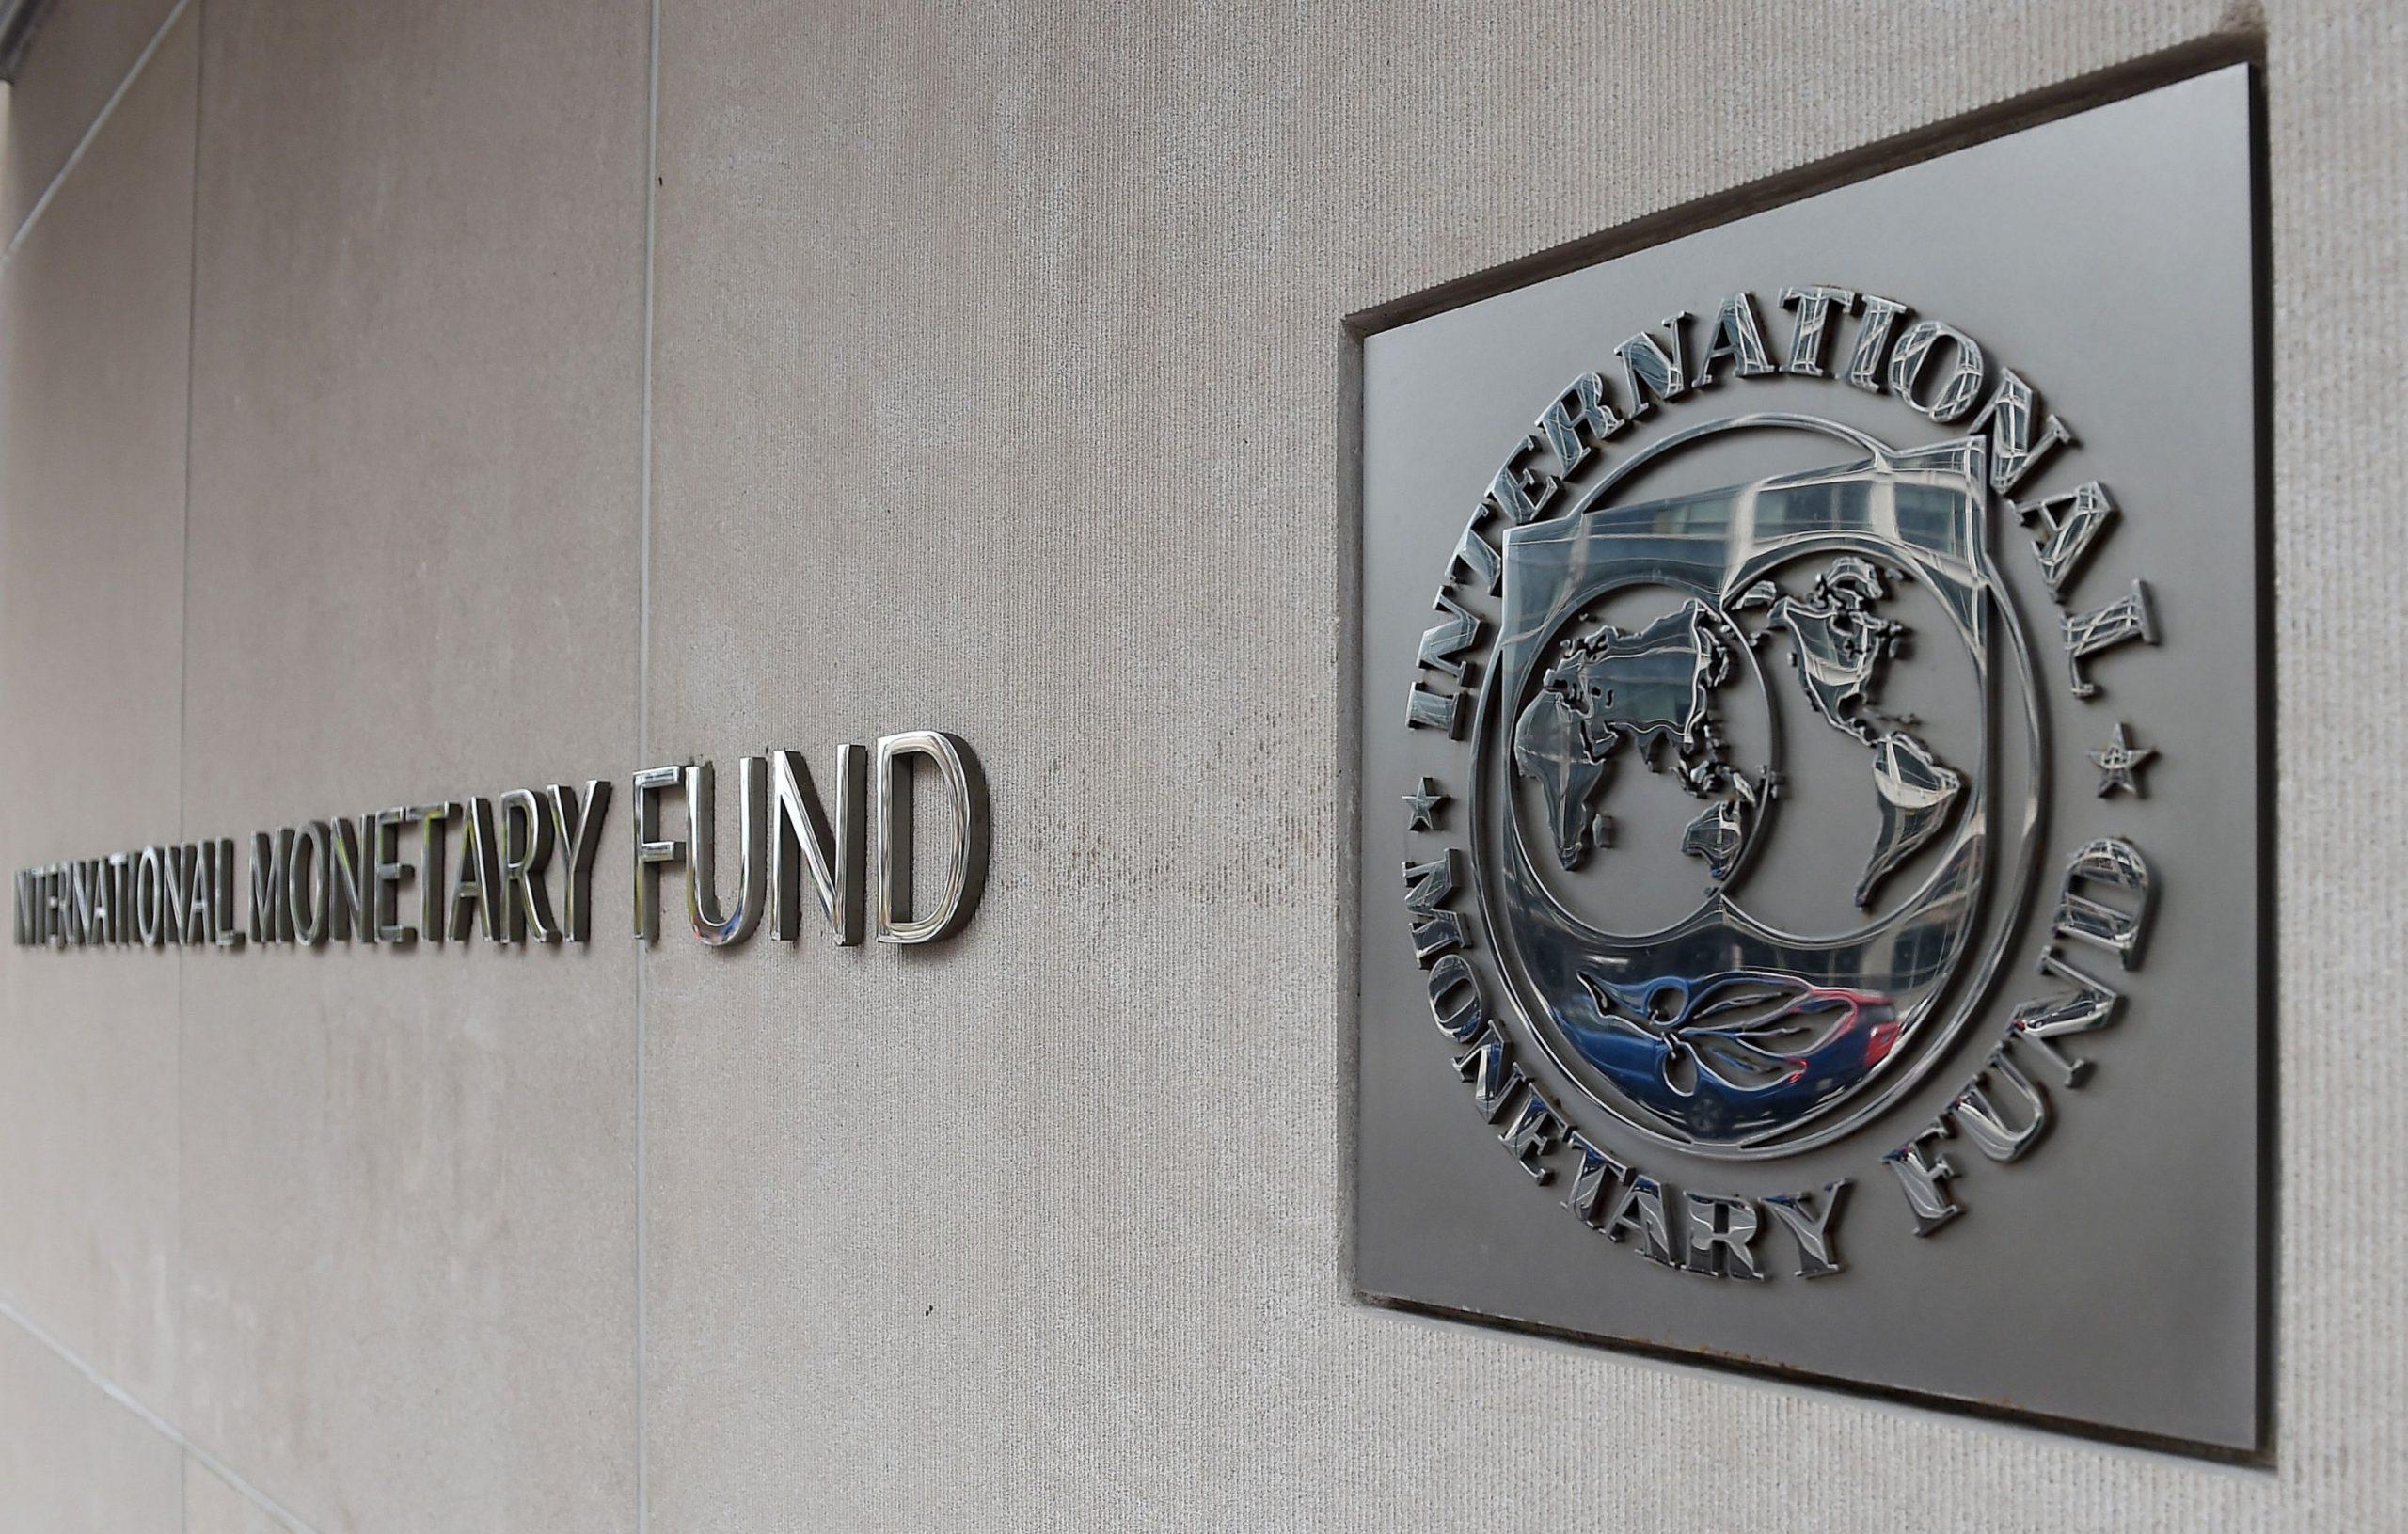 IMF mission starts policy discussions with Ukrainian authorities on a potential Fund-supported program